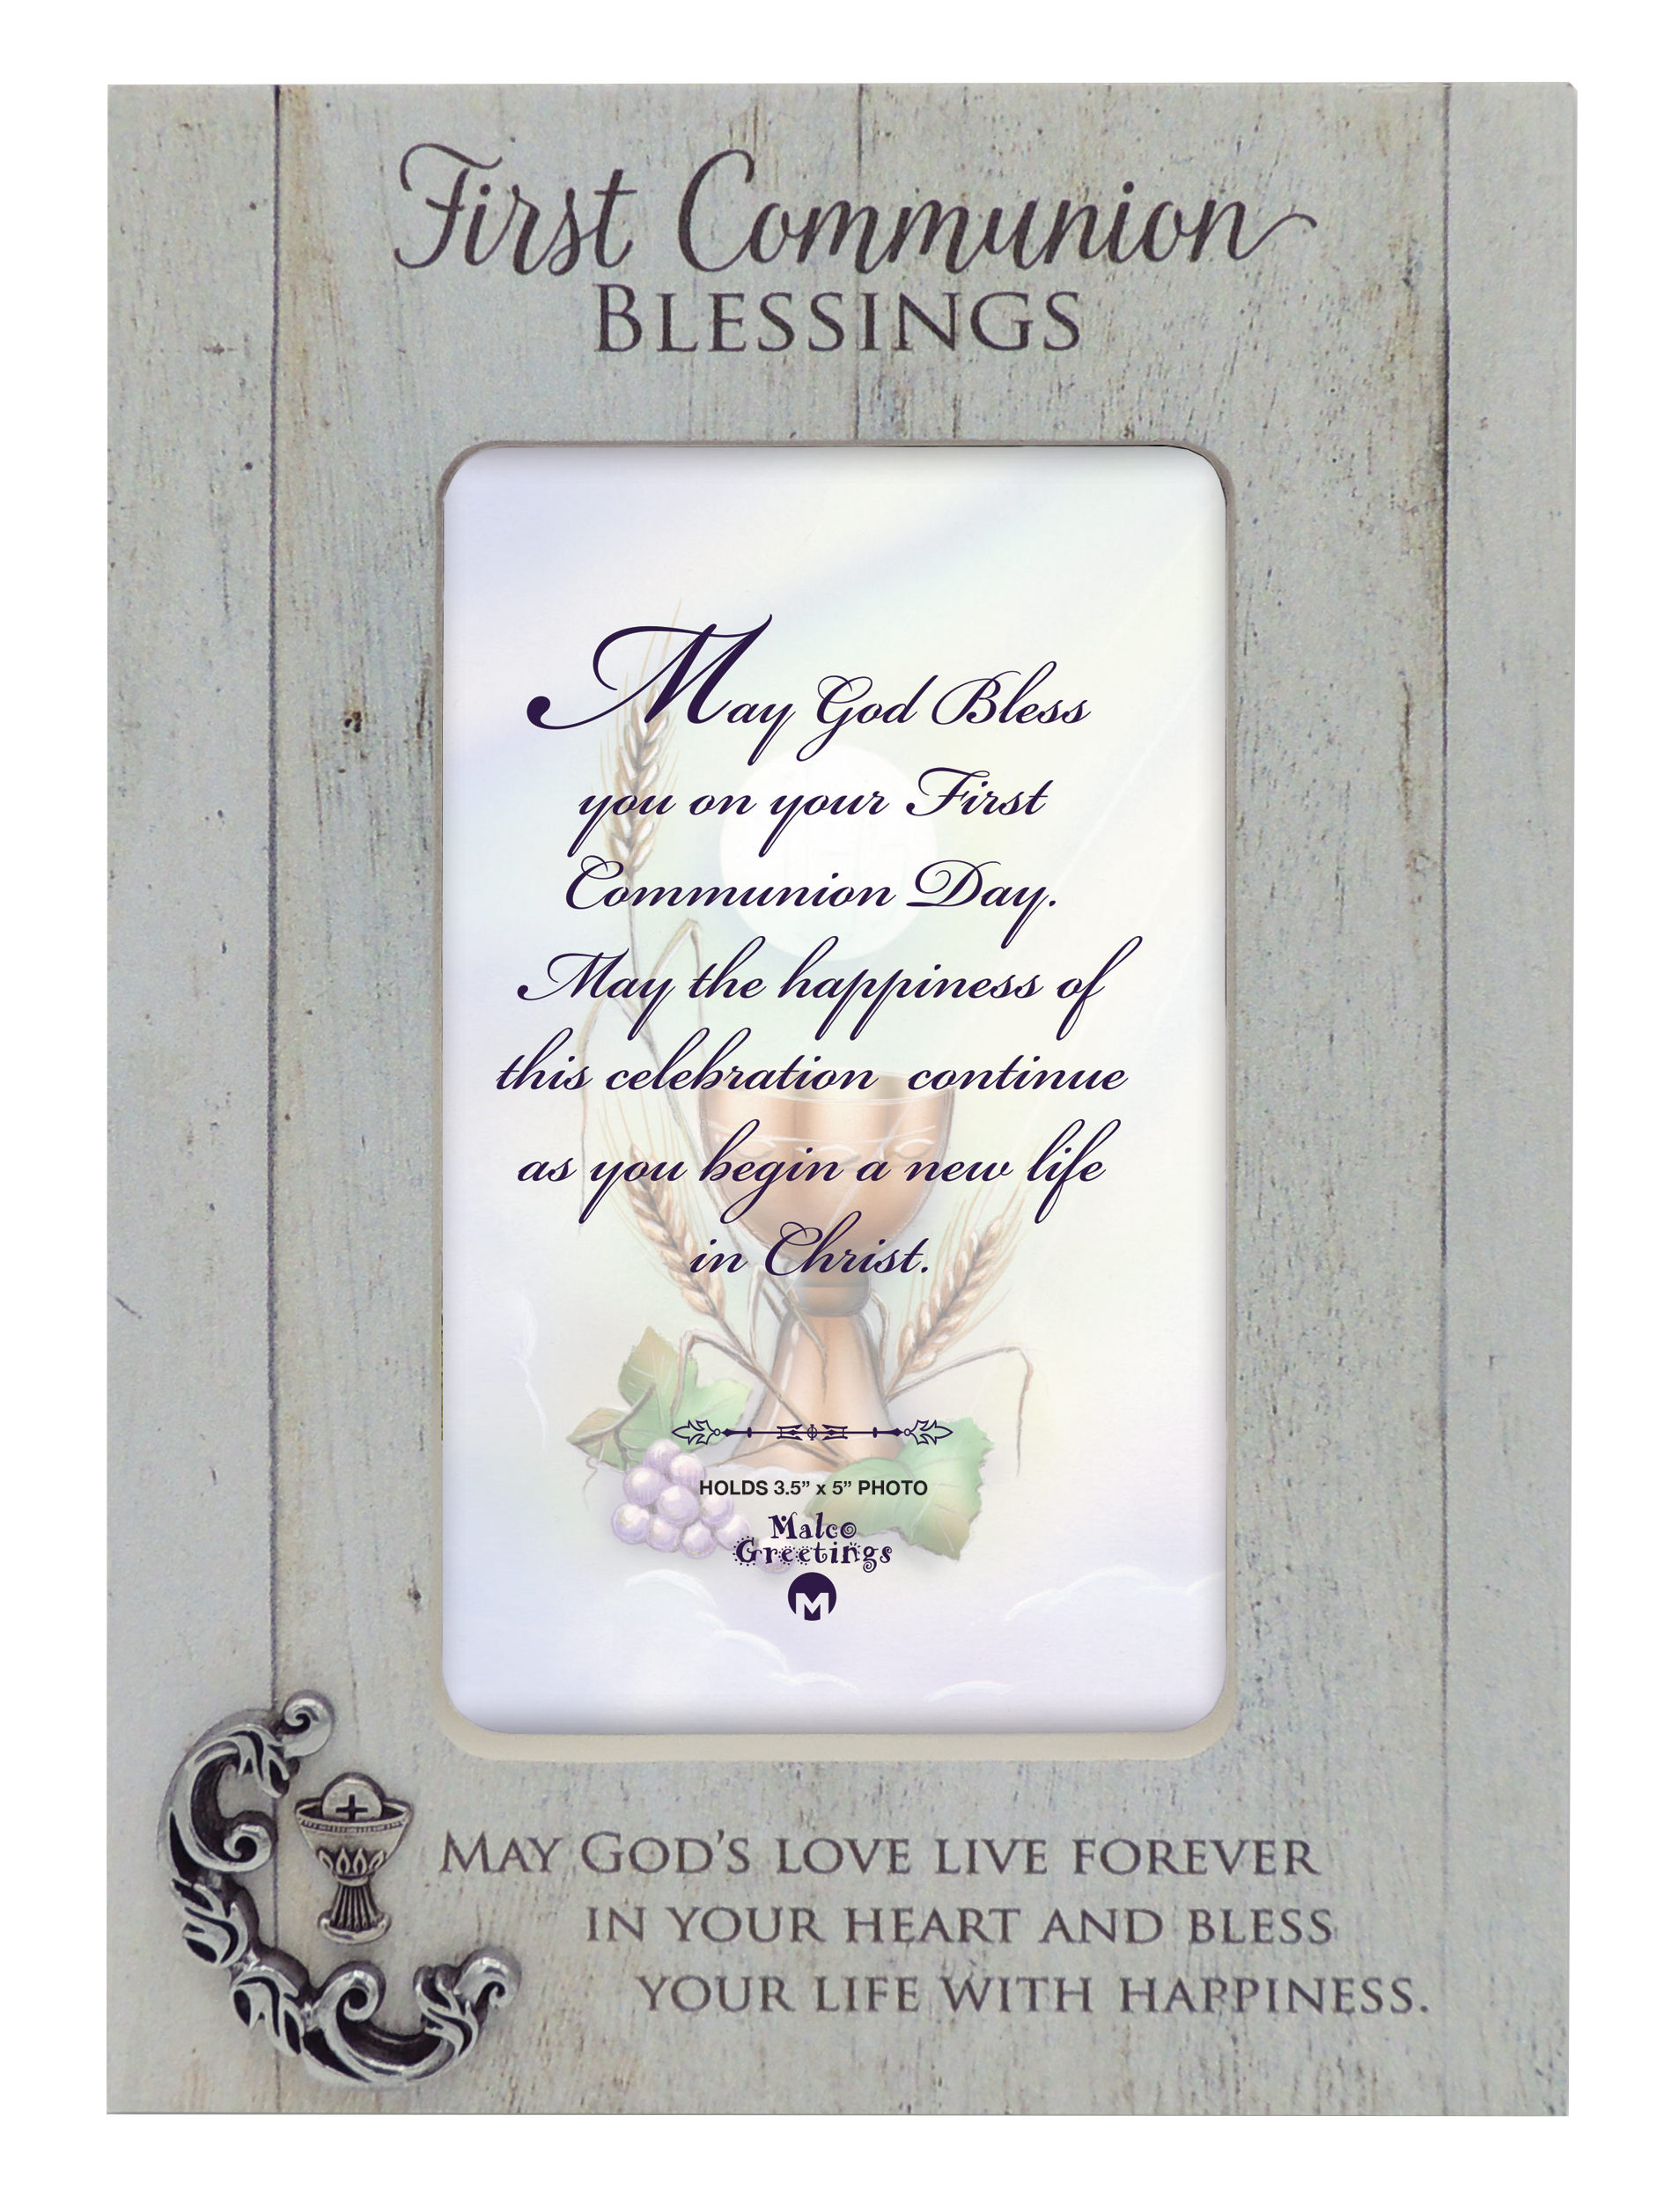 5.5in x7.5in Wood First Communion frame w/Metal Accent hangs or stands - holds 3.5in x5in photo